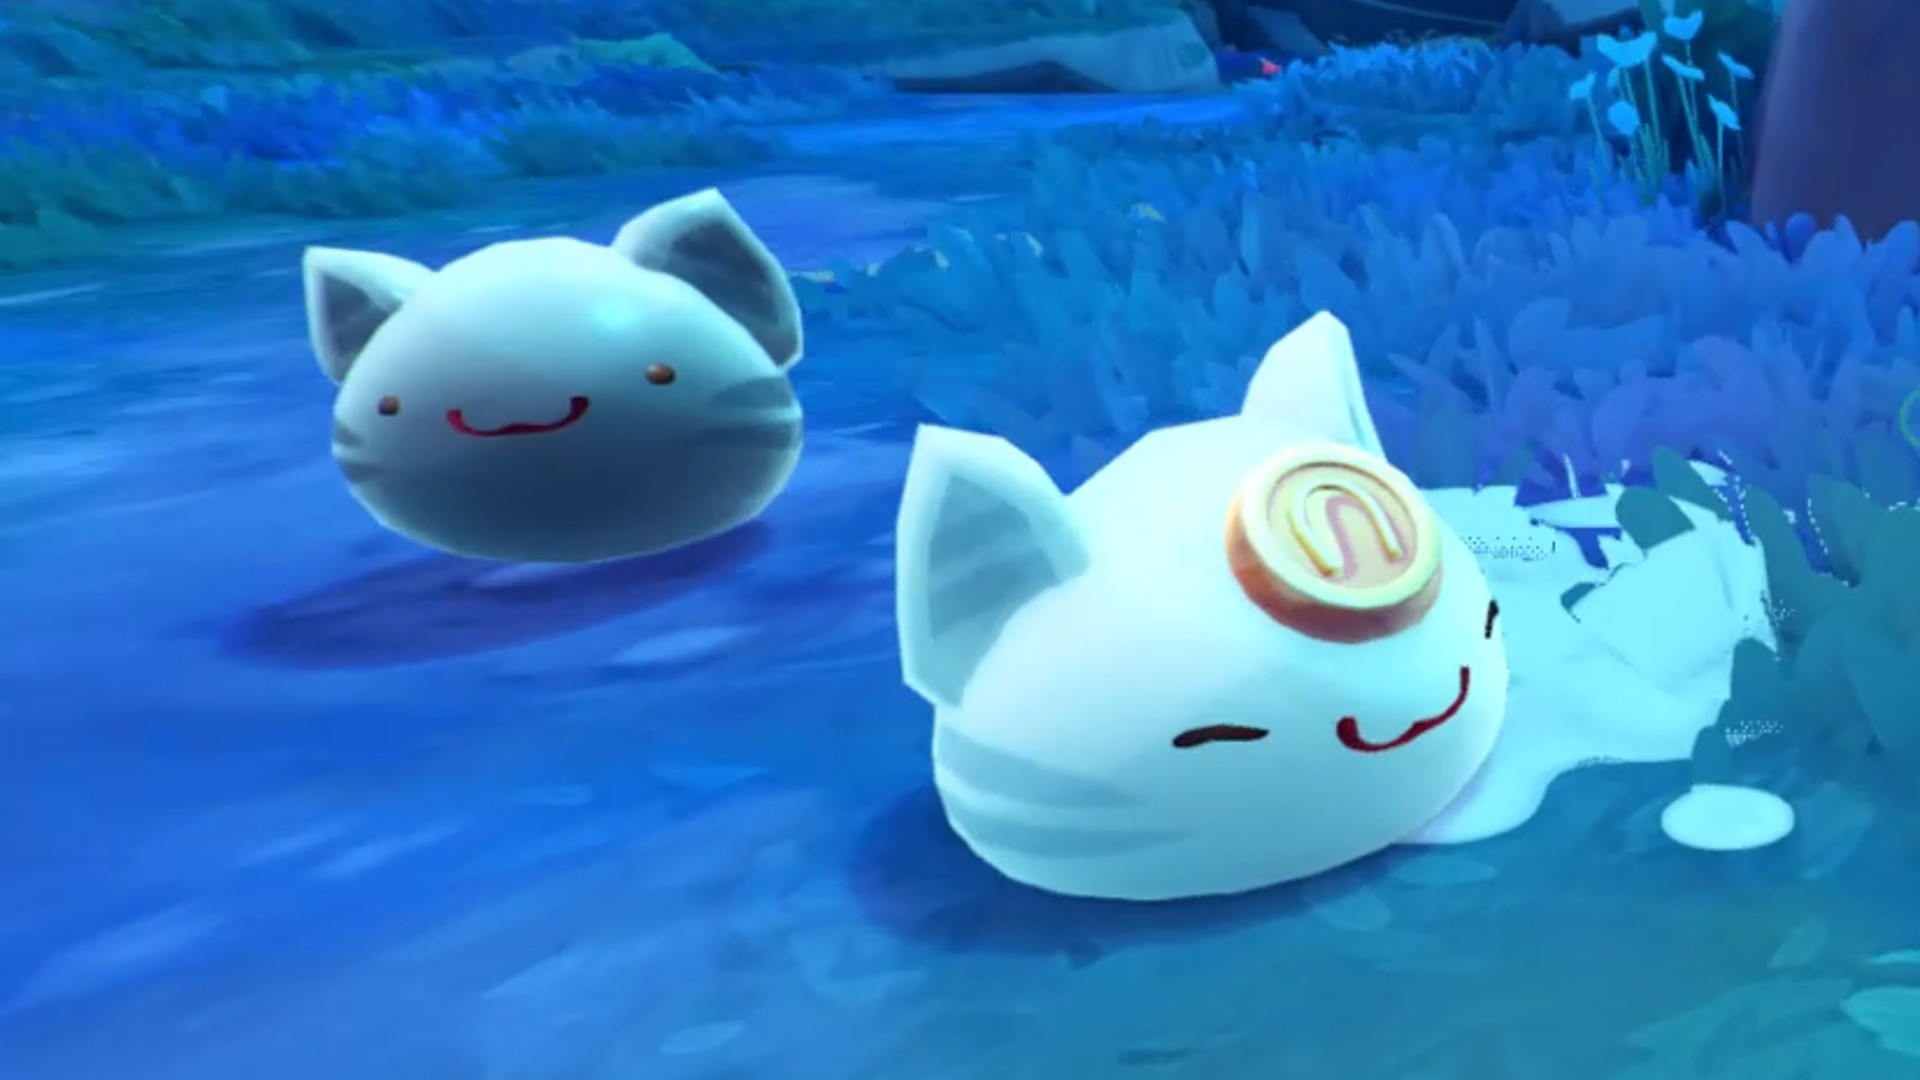 How to Find HUNTER SLIMES in Slime Rancher 2! 